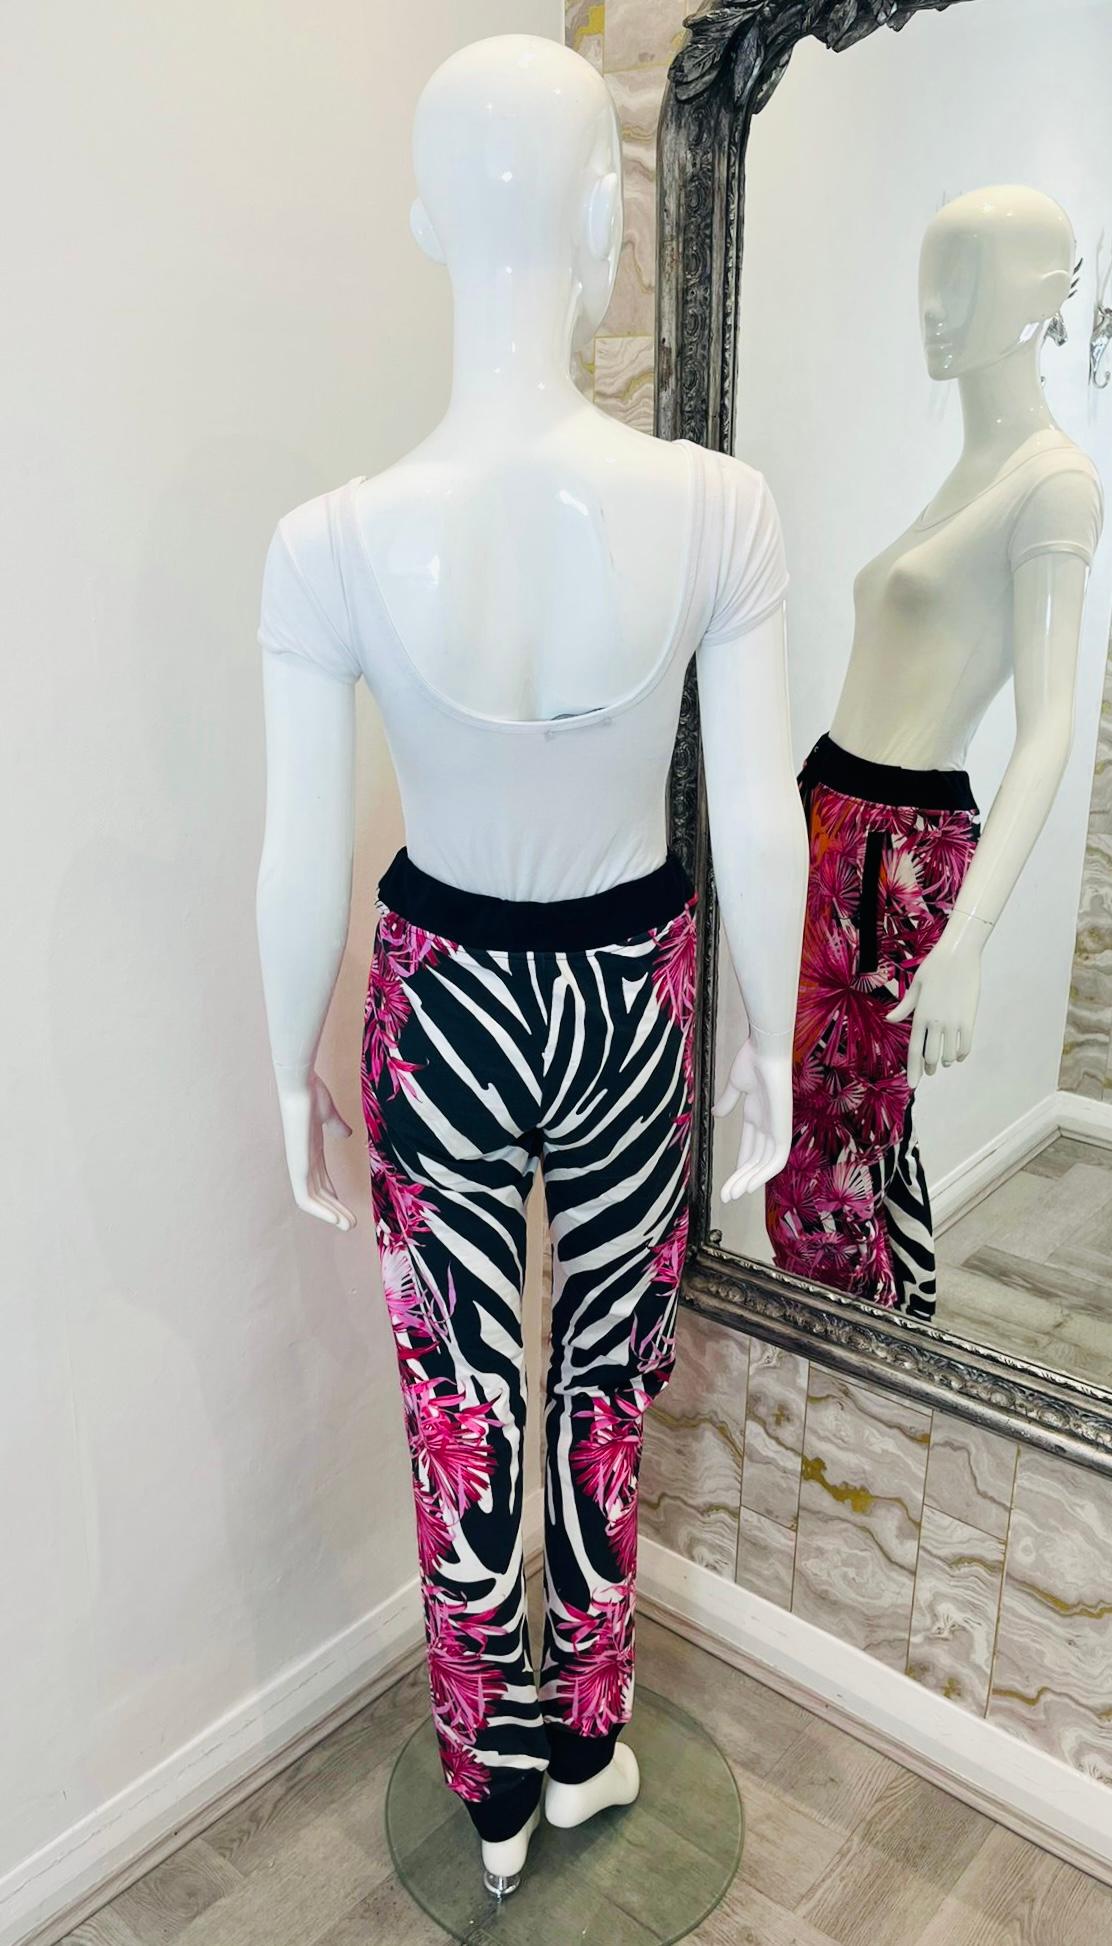 Versus Versace Printed Cotton Trousers In Excellent Condition For Sale In London, GB